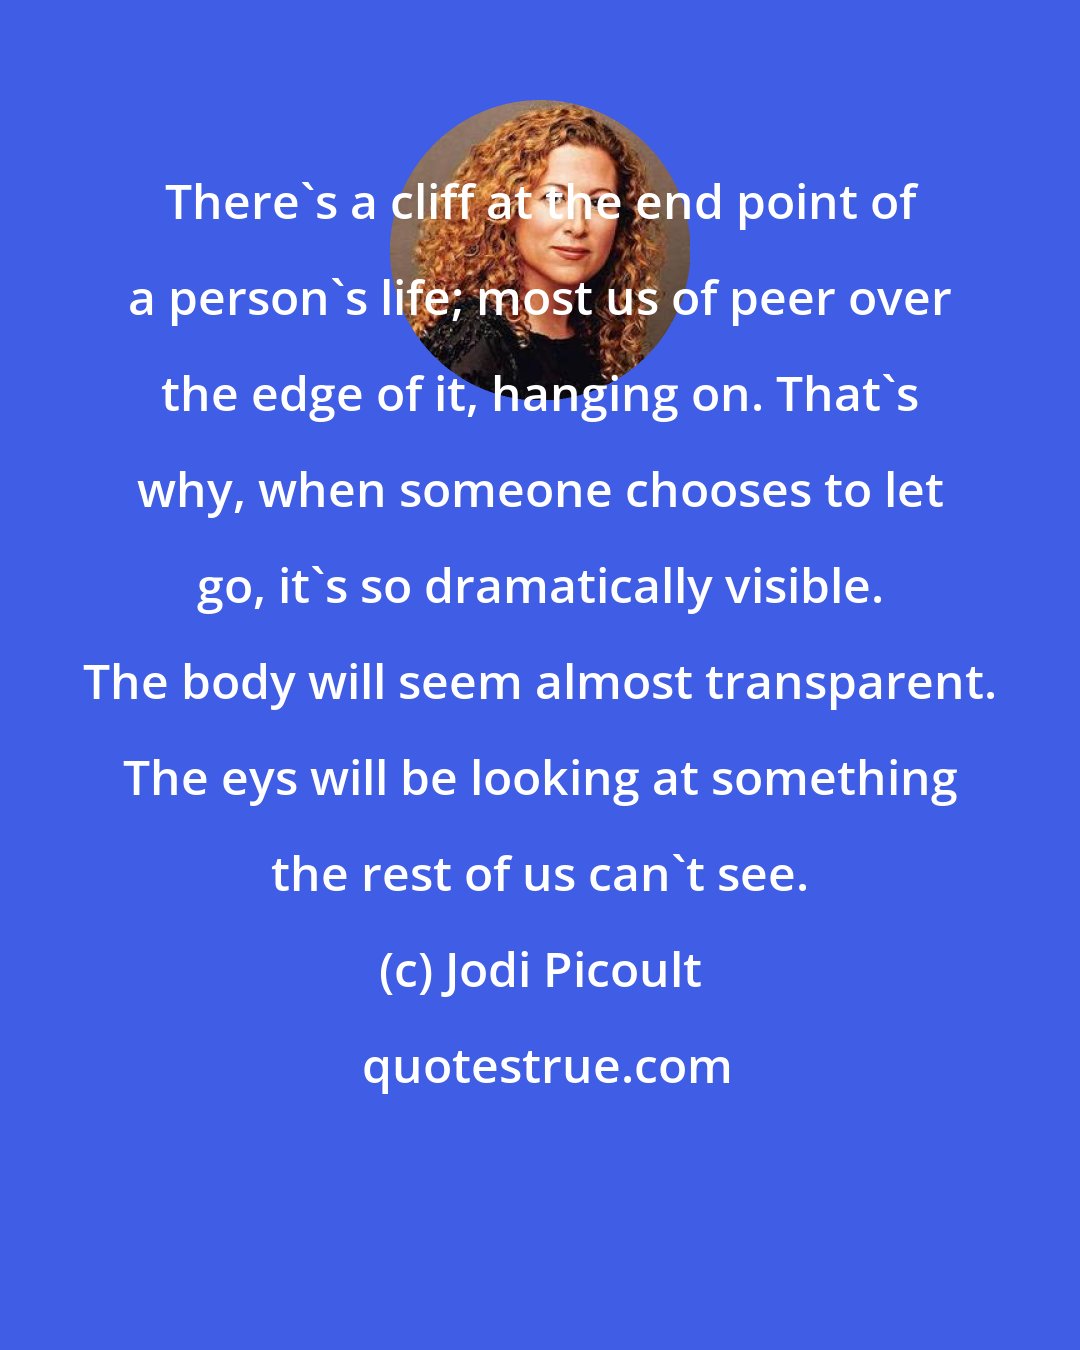 Jodi Picoult: There's a cliff at the end point of a person's life; most us of peer over the edge of it, hanging on. That's why, when someone chooses to let go, it's so dramatically visible. The body will seem almost transparent. The eys will be looking at something the rest of us can't see.